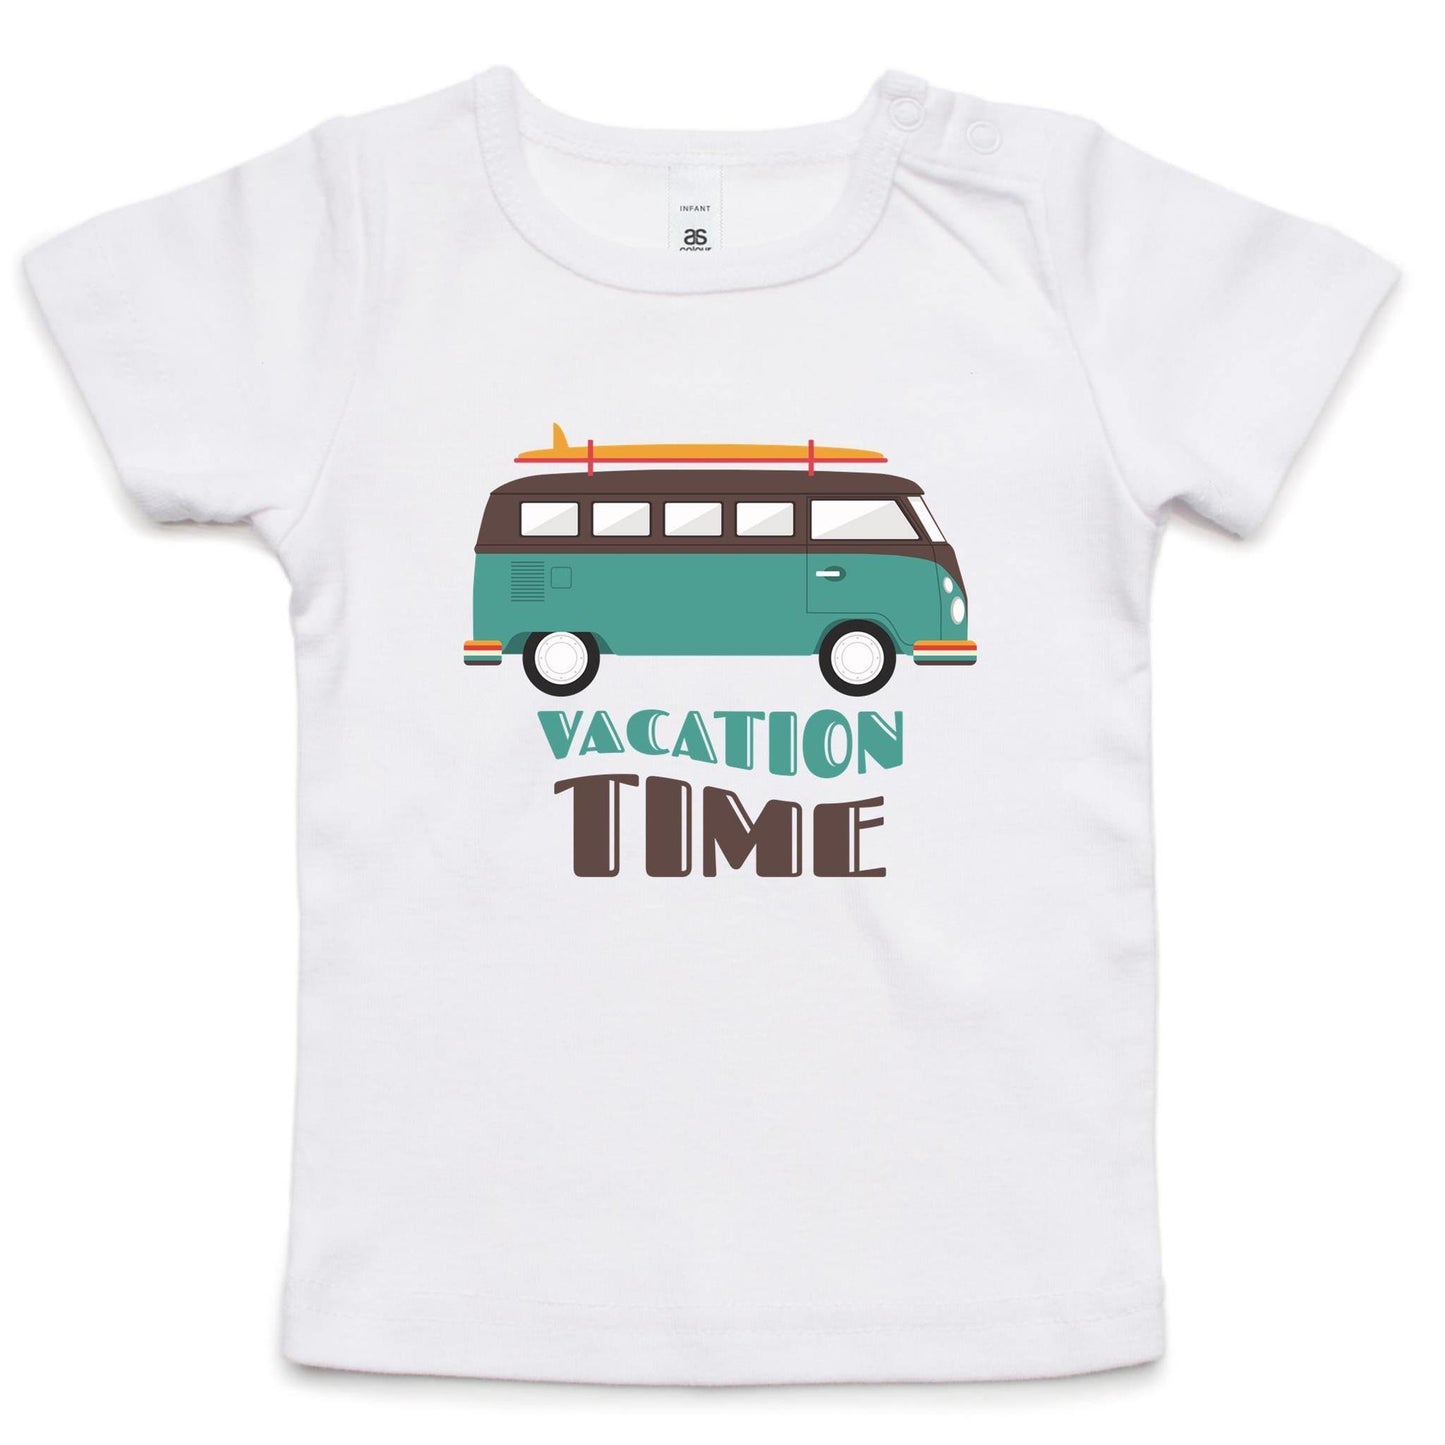 Vacation Time - Baby T-shirt White Baby T-shirt kids